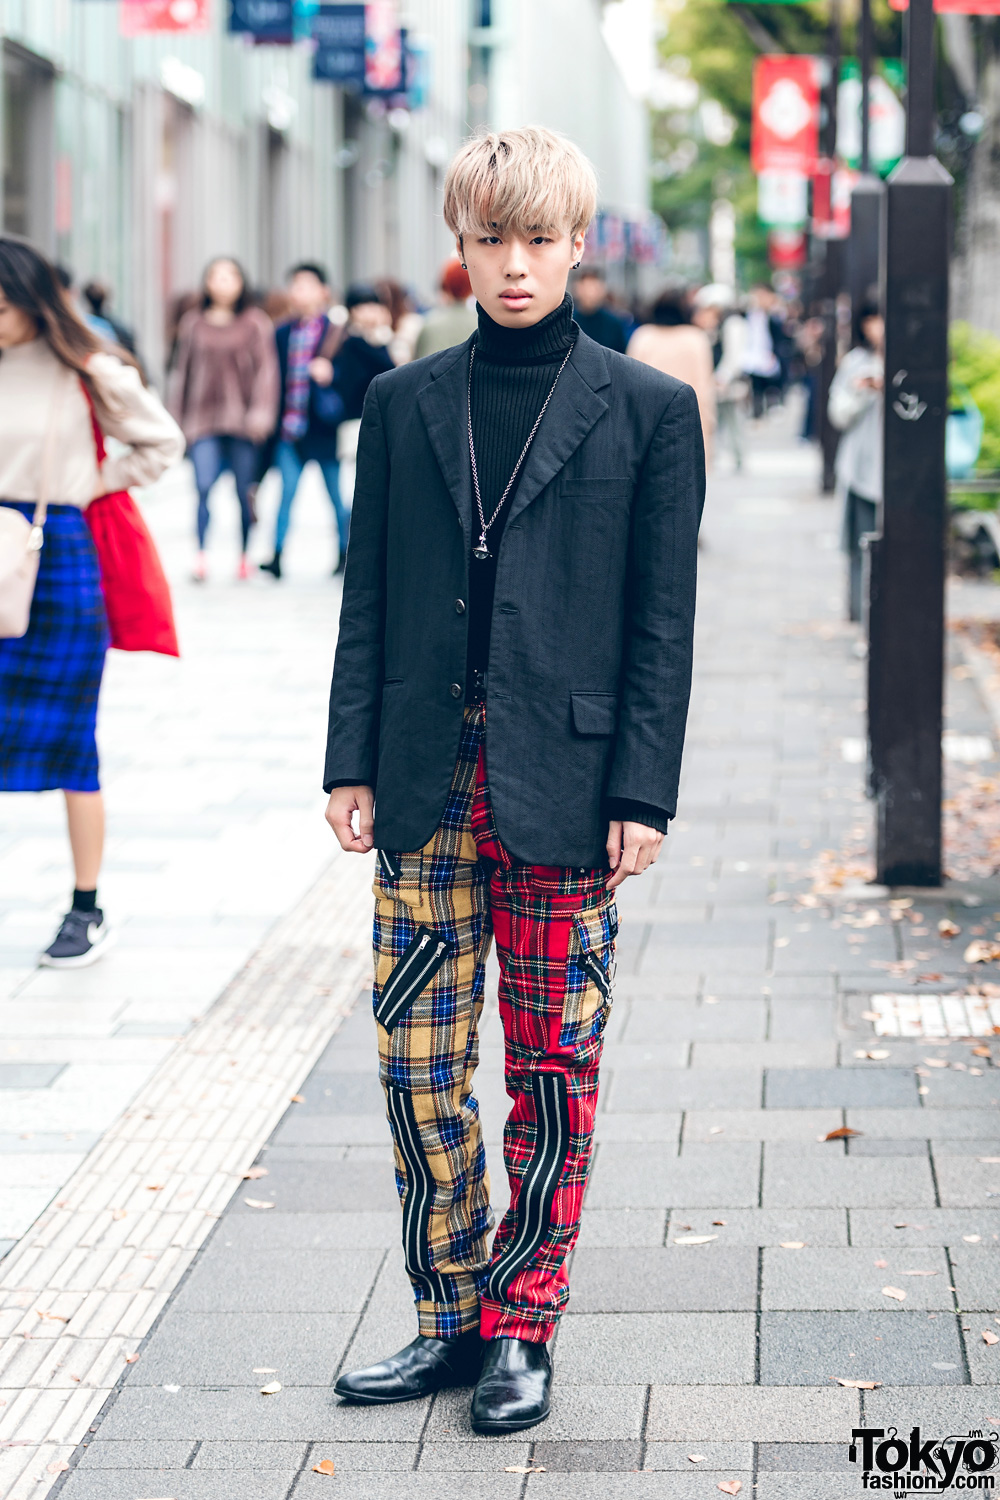 Plaid Street Style in Harajuku w/ Comme des Garcons, Tiger of London, Vanquish & Vivienne Westwood